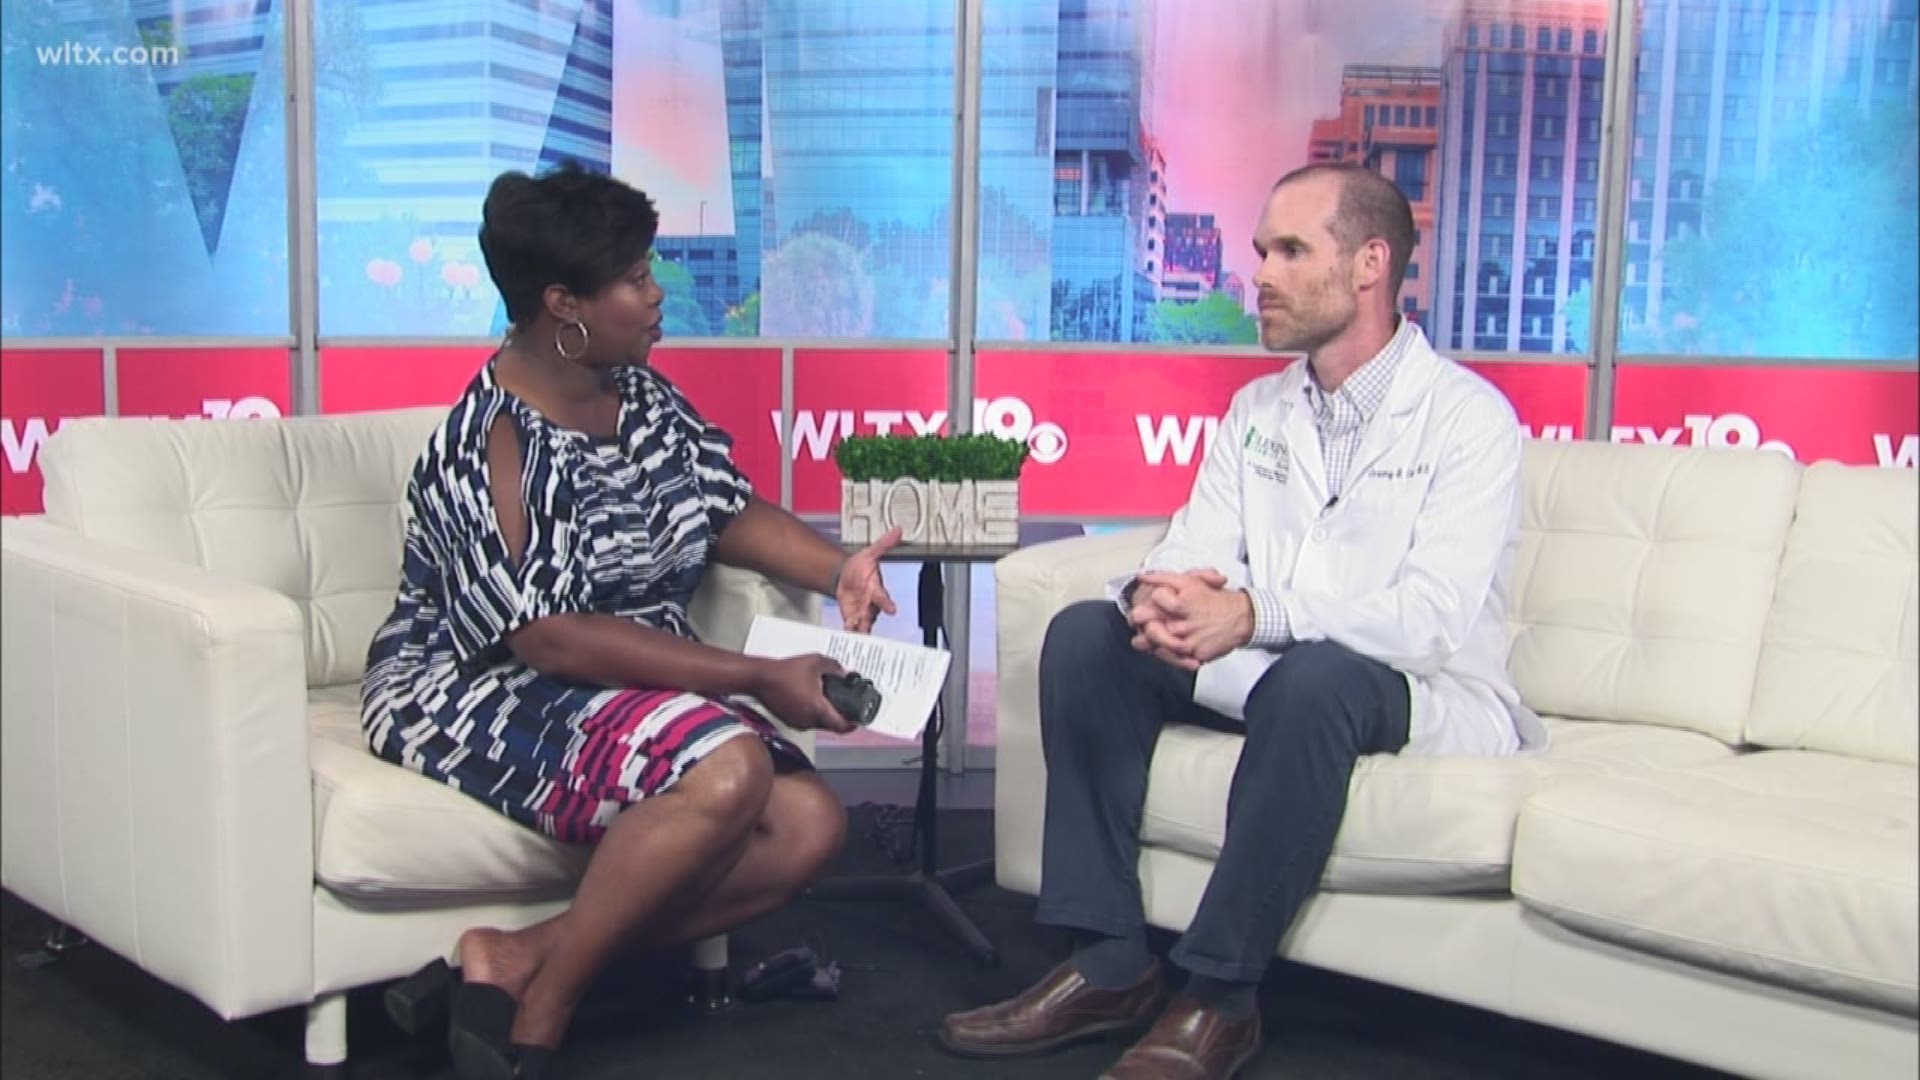 We're hearing a lot about recalls lately. When it comes to prescription medication, what should you do if the medicine you take is under recall? We got some answers from Dr. Jeremy Crisp, from Lexington Family Practice Northeast. 